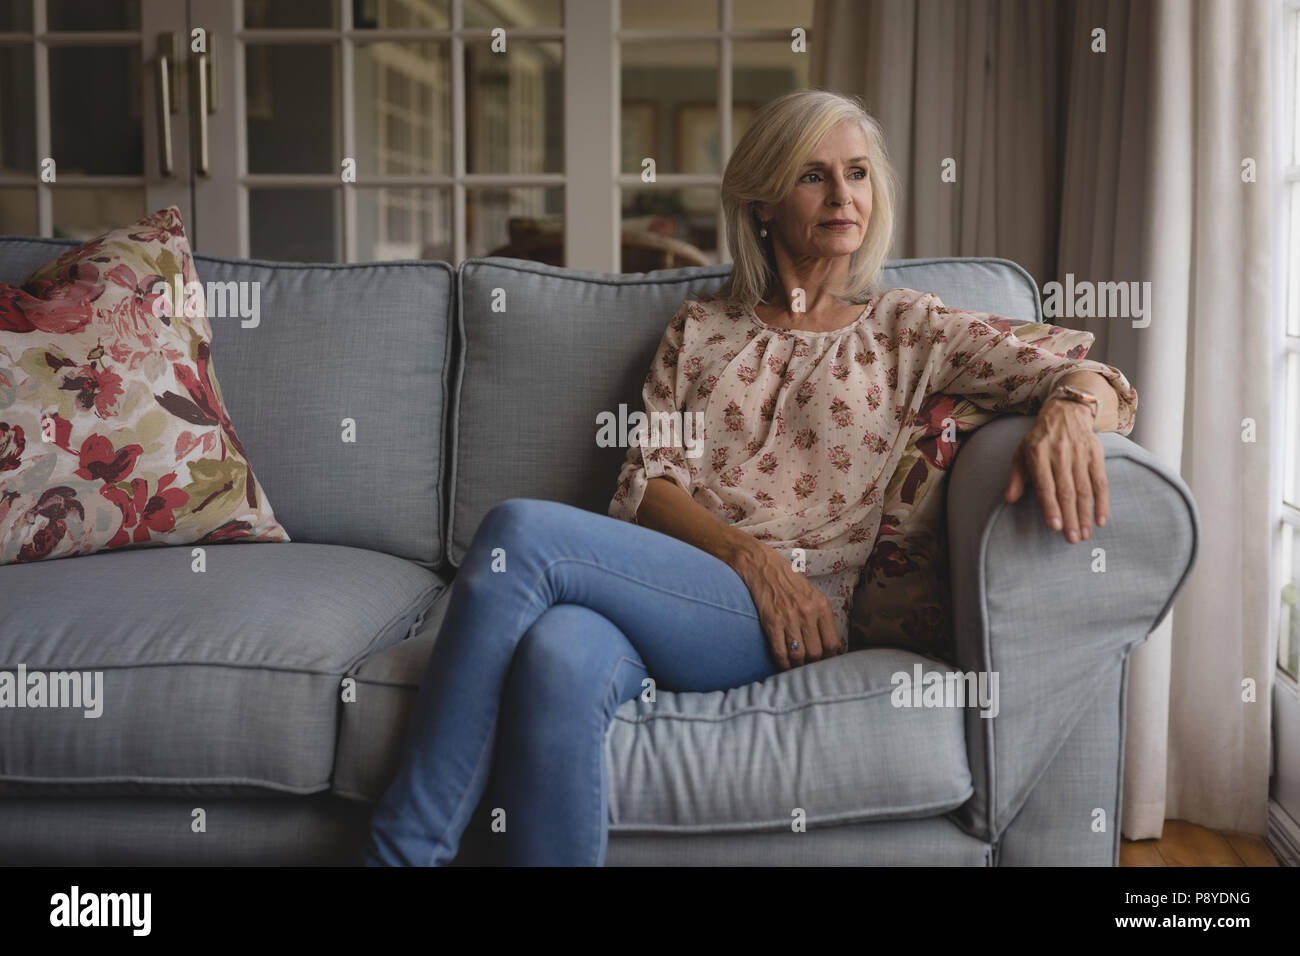 Happy woman sitting on sofa Banque D'Images